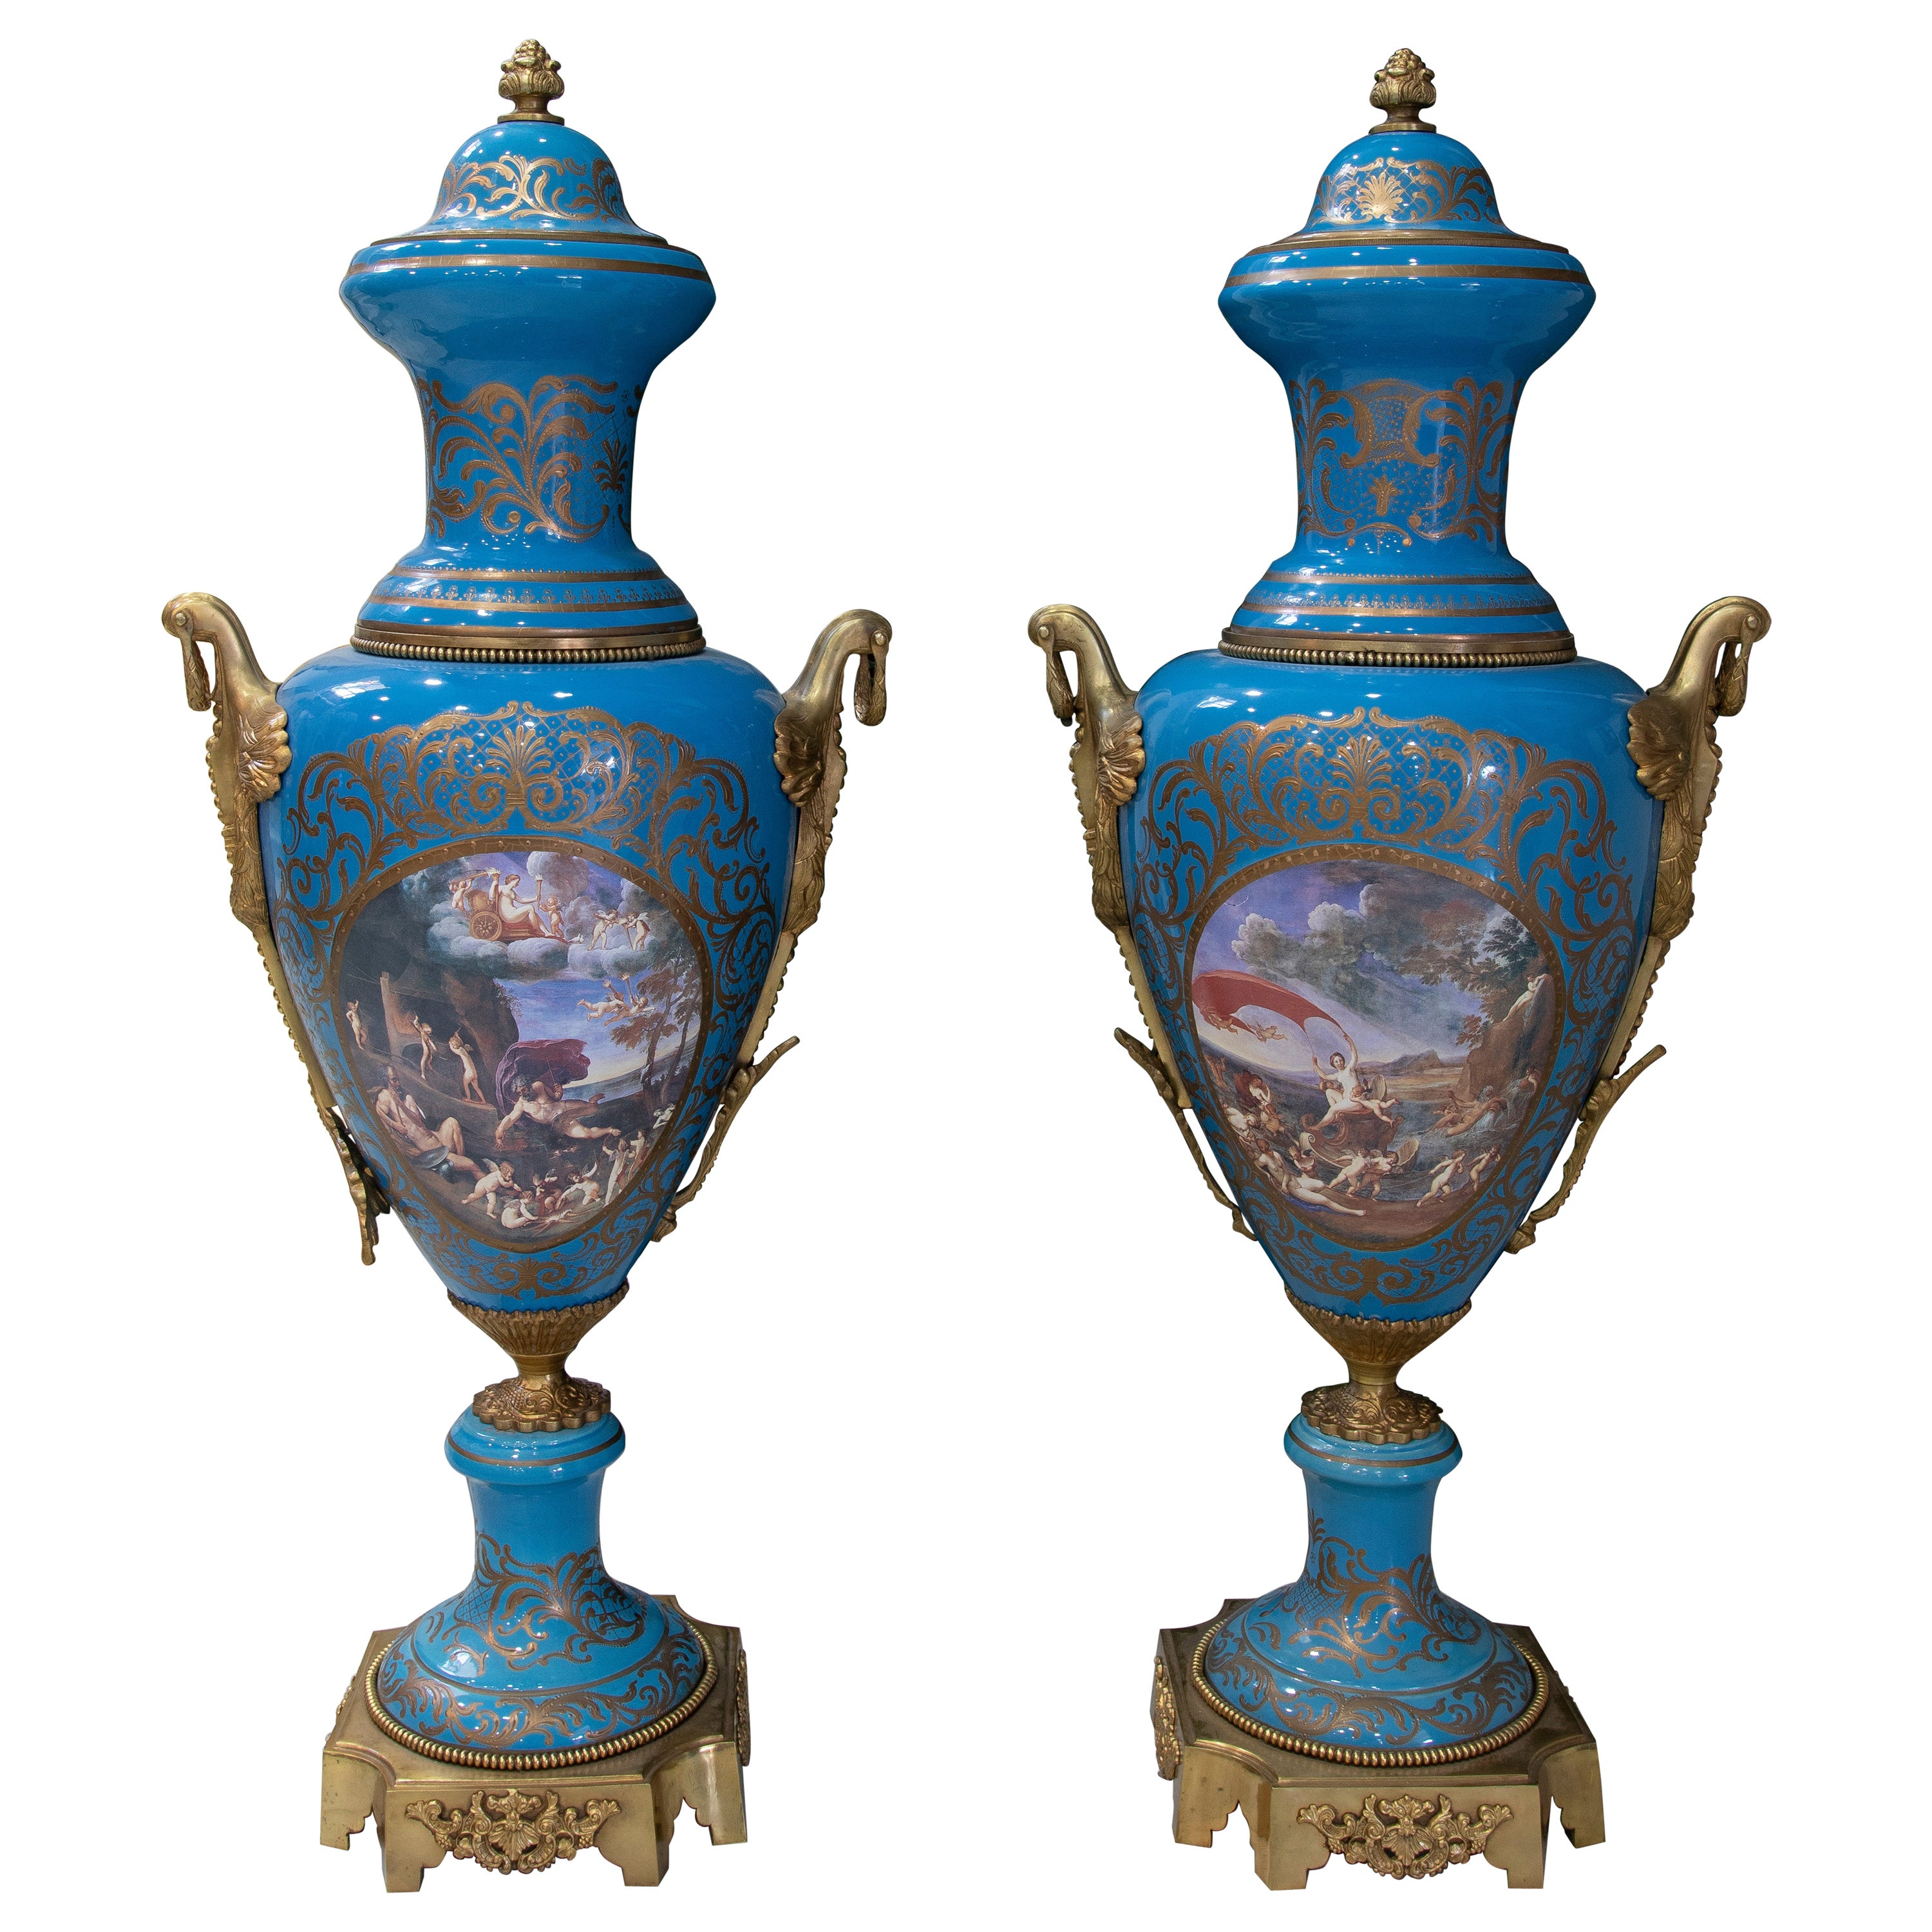 Pair of Hand-Painted Porcelain Vases with Bronze Handles